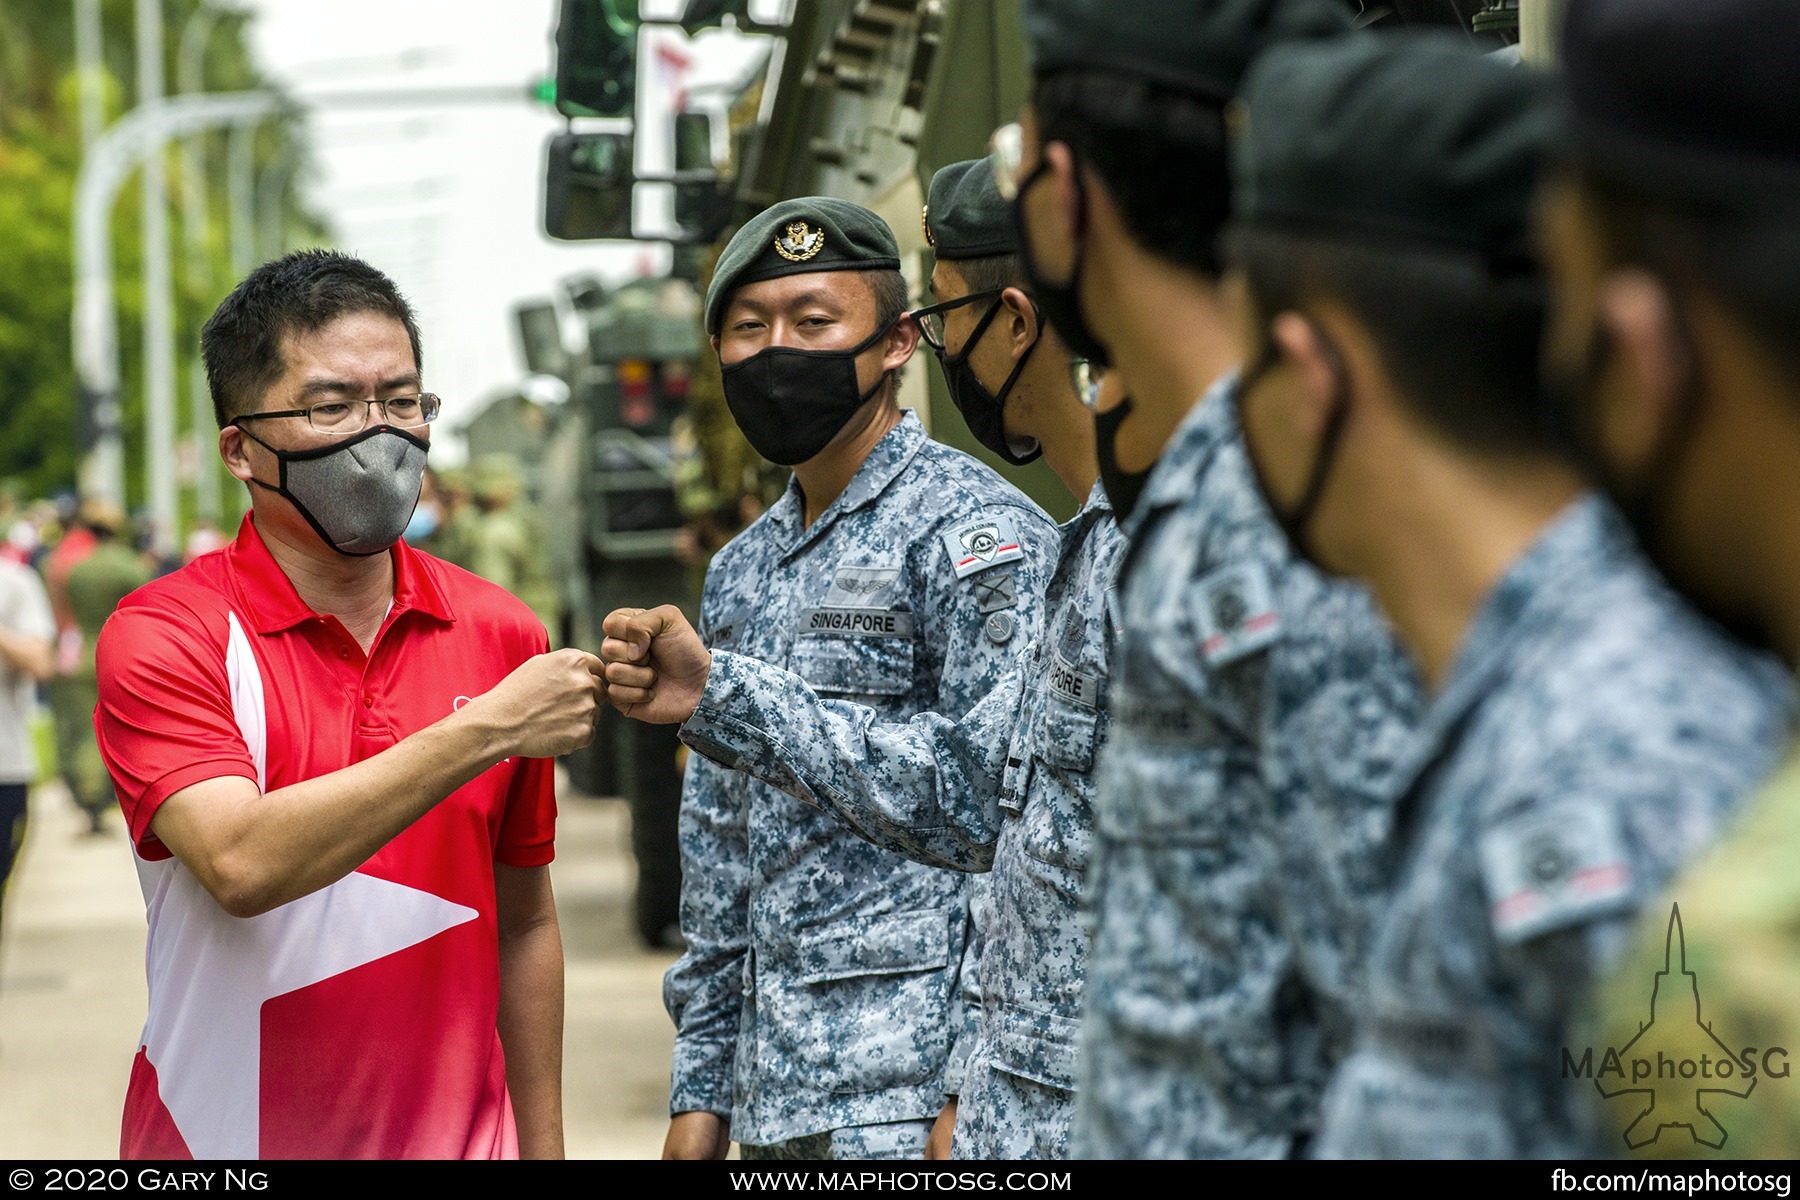 Lieutenant-General (LG) Melvyn Ong, Chief of Defence Force, Singapore Armed Forces, greets RSAF airmen at a mobile column rehearsal at Tuas.